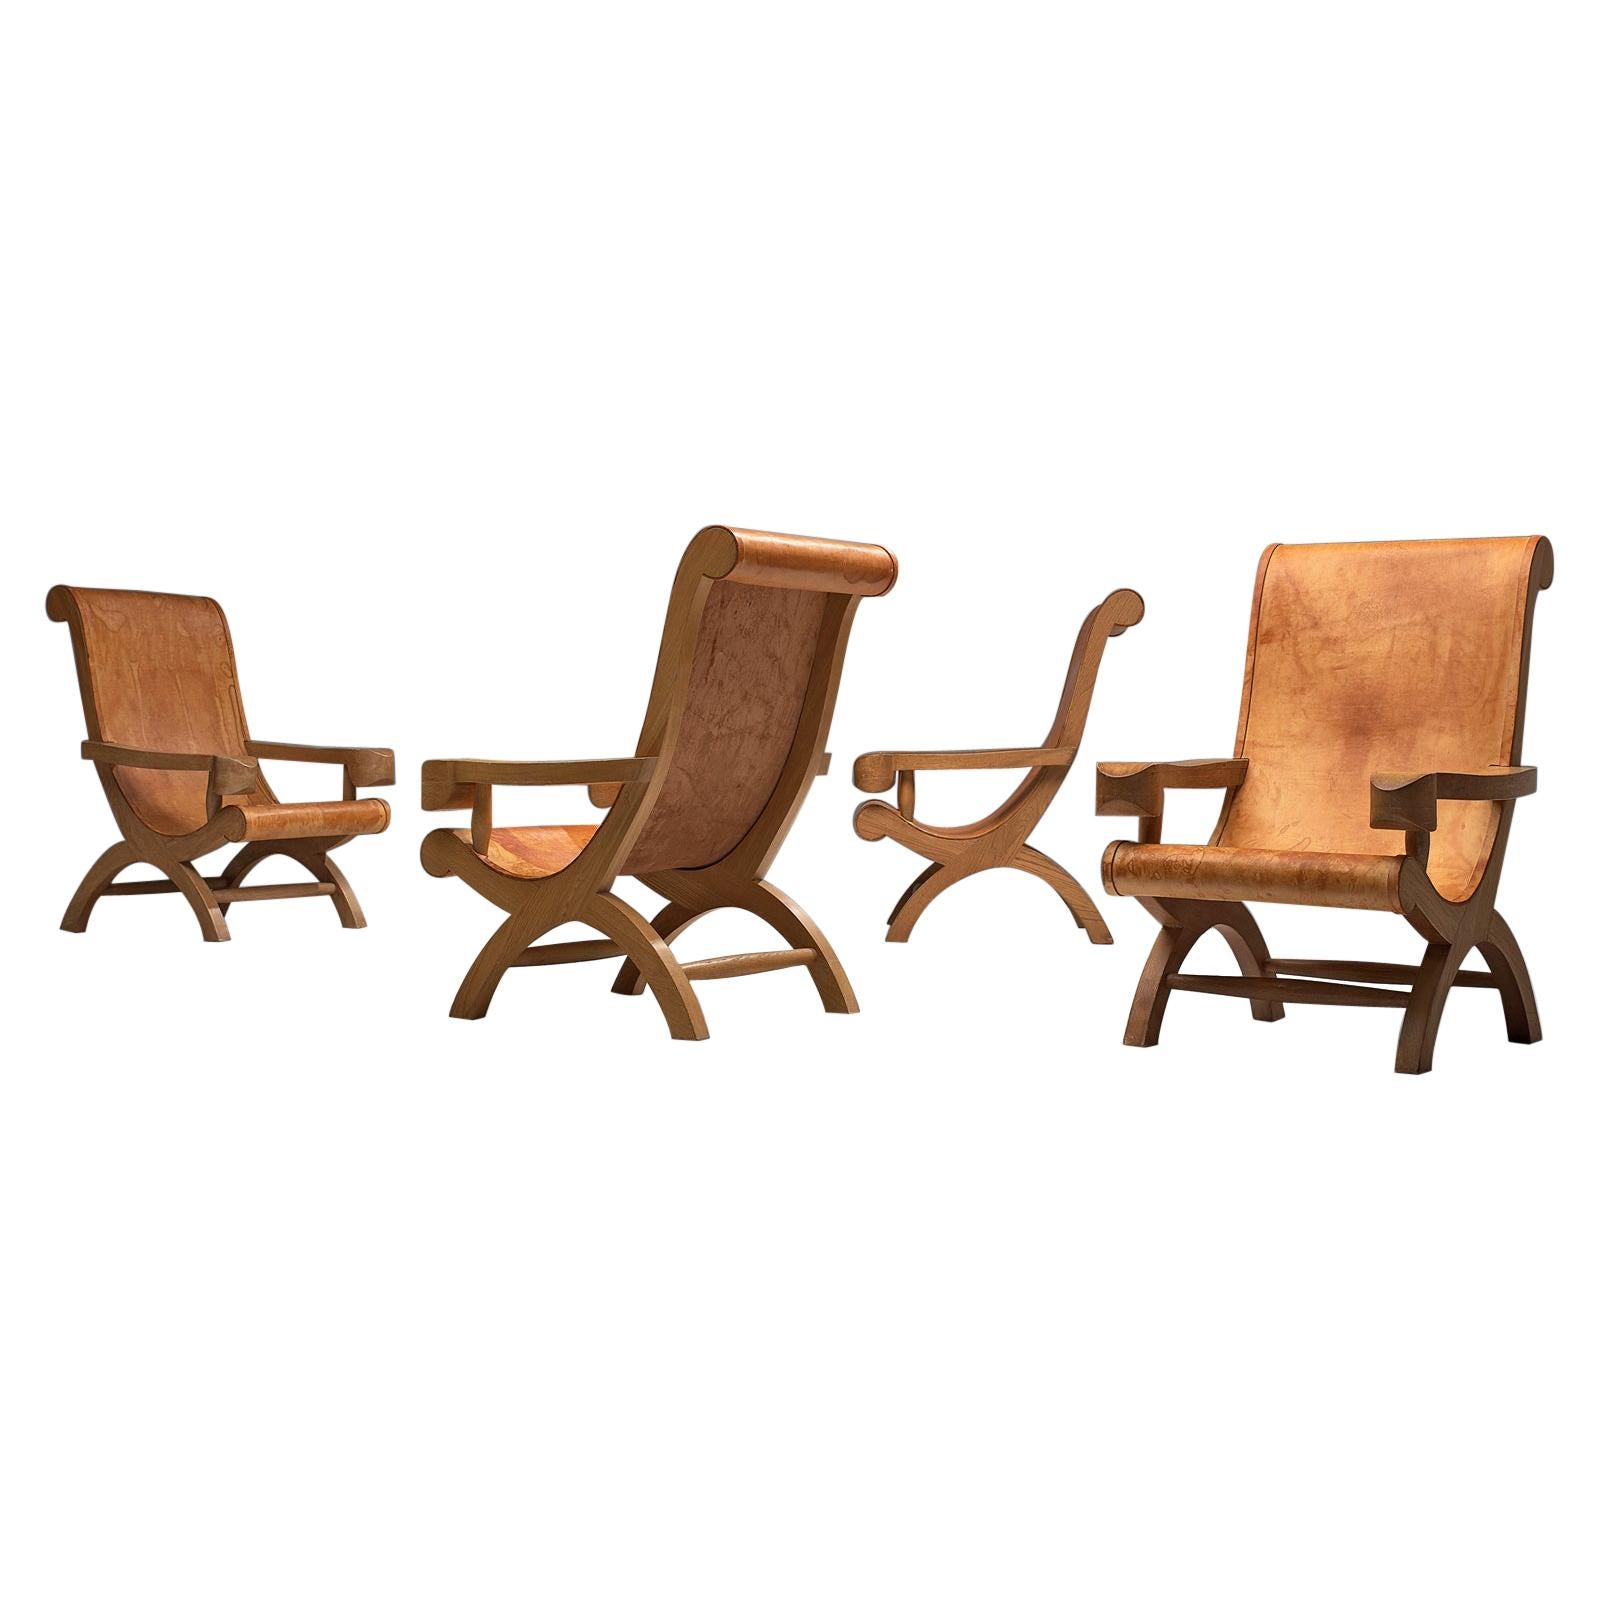 Clara Porset Four Butaque Lounge Chairs in Cognac Leather